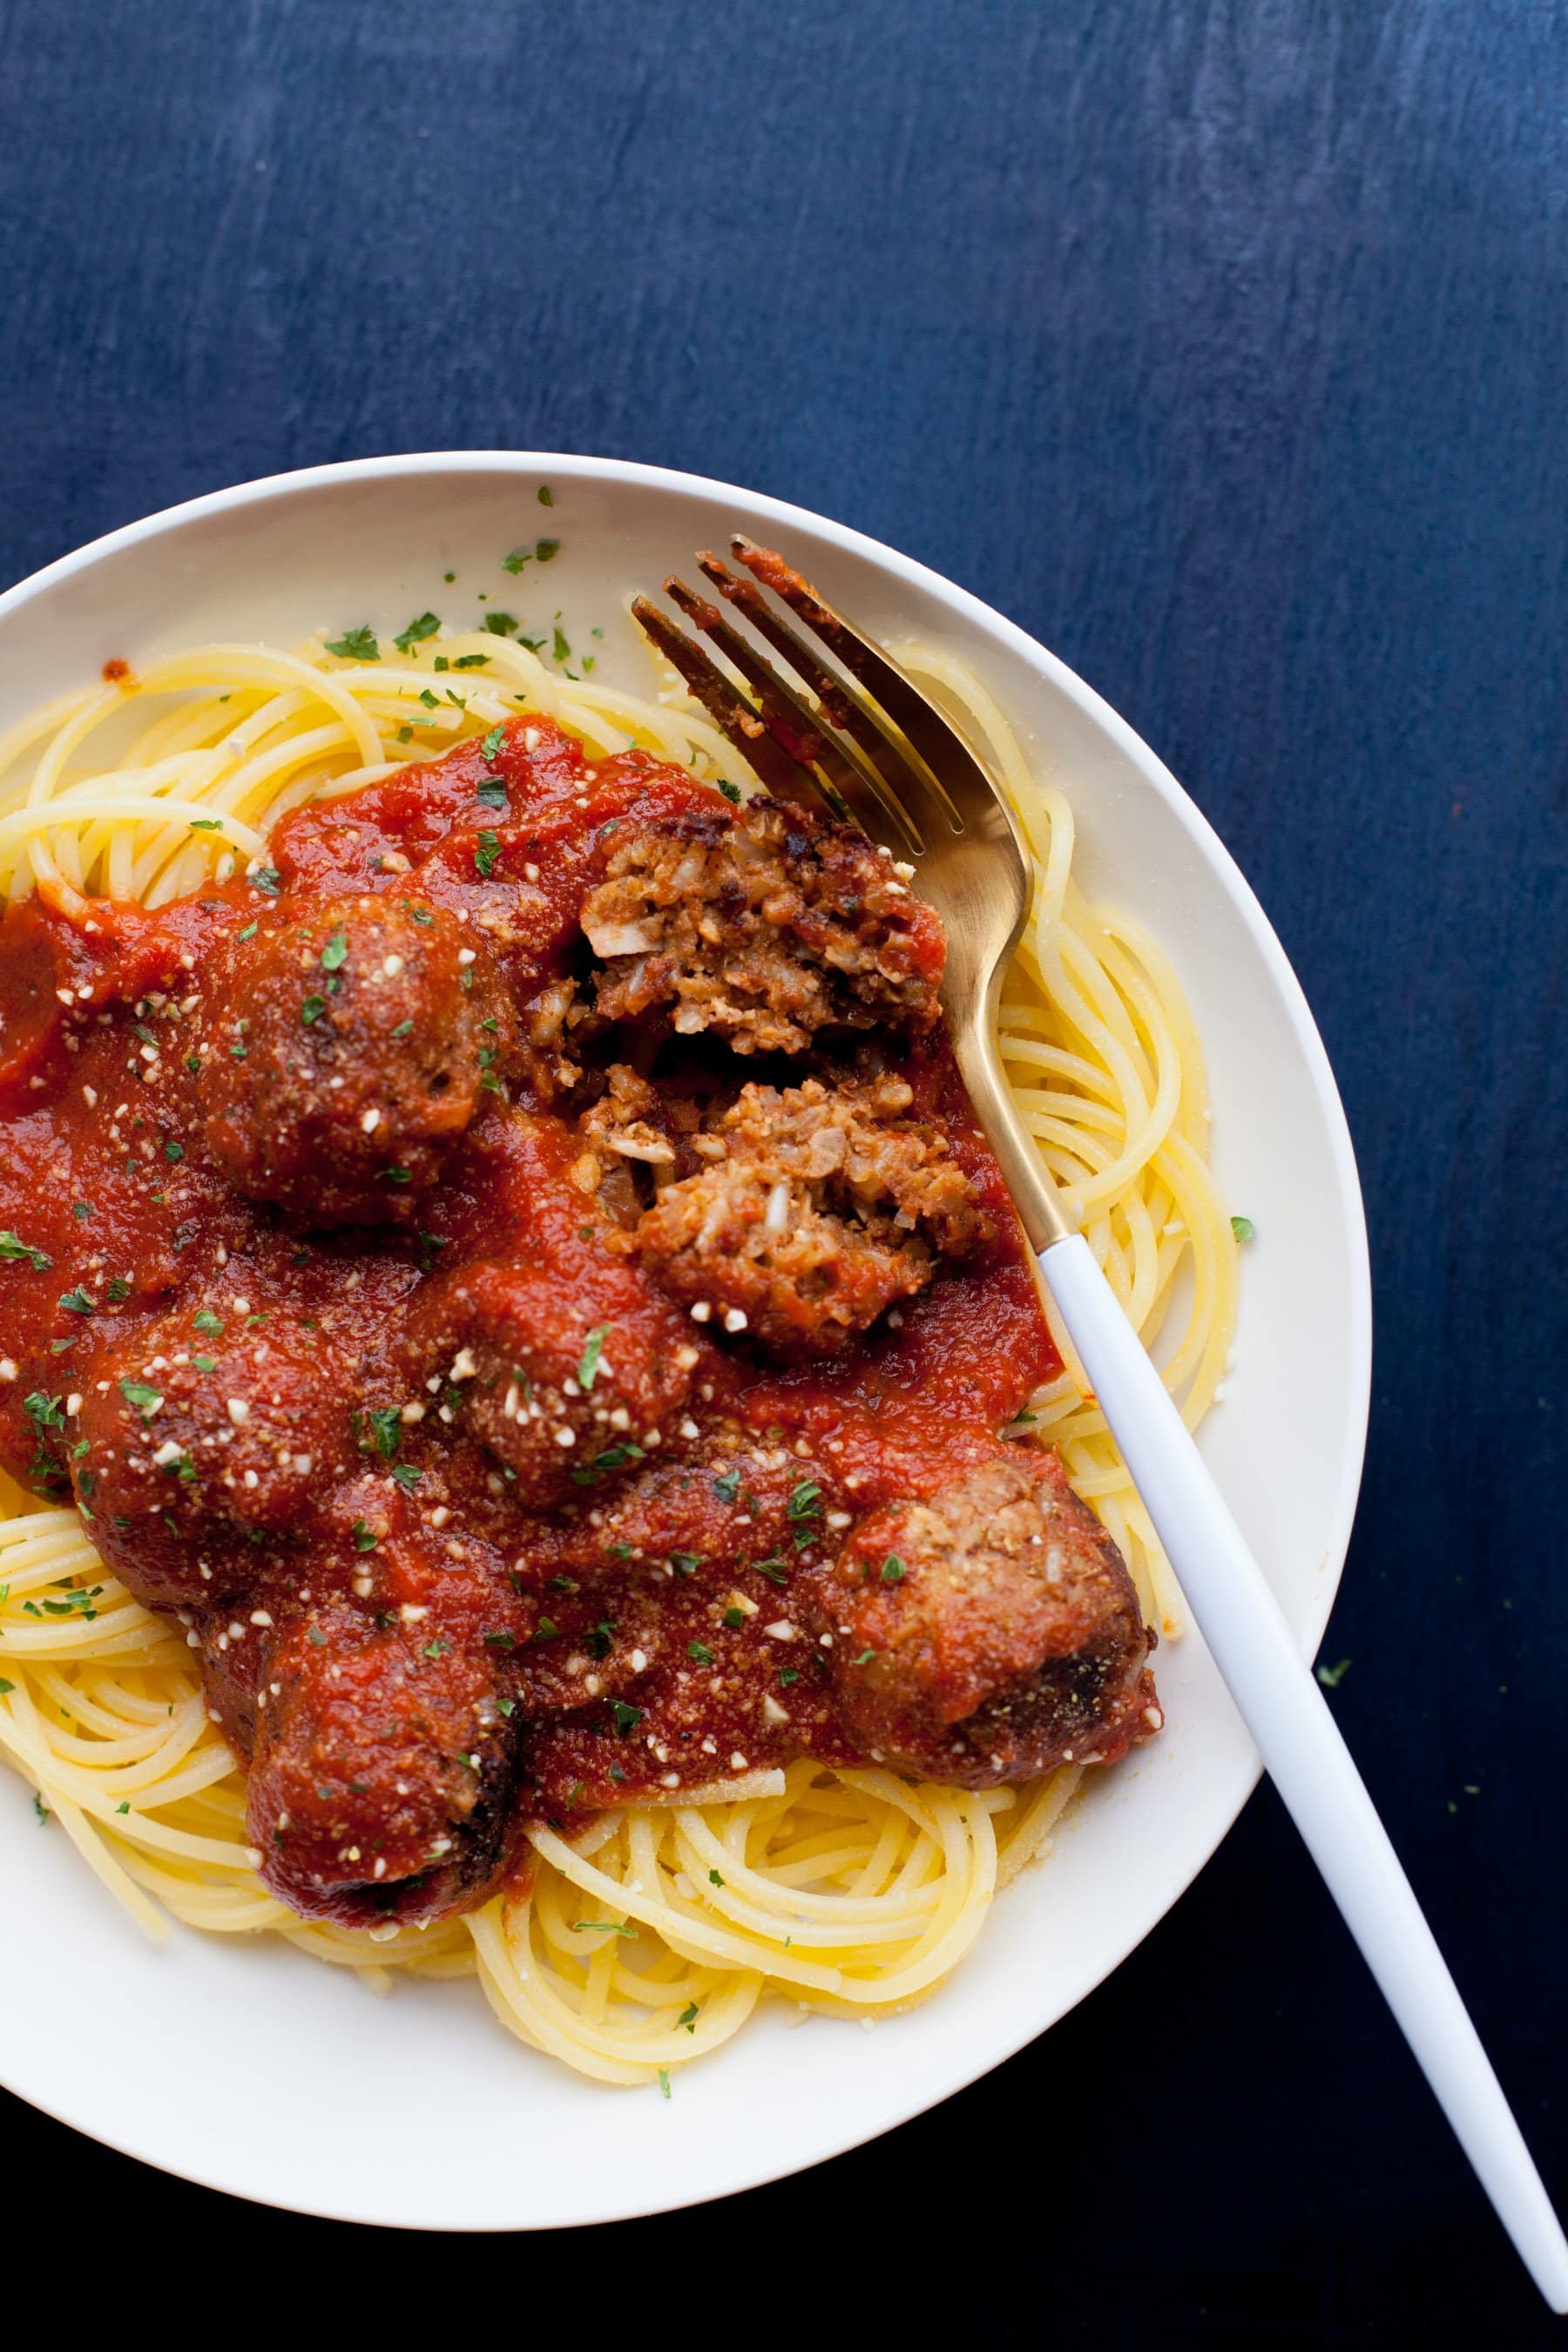 White plate filled with spaghetti, vegan meatballs, and marinara sauce on a blue background. A white-handled fork rests on the edge of the plate.